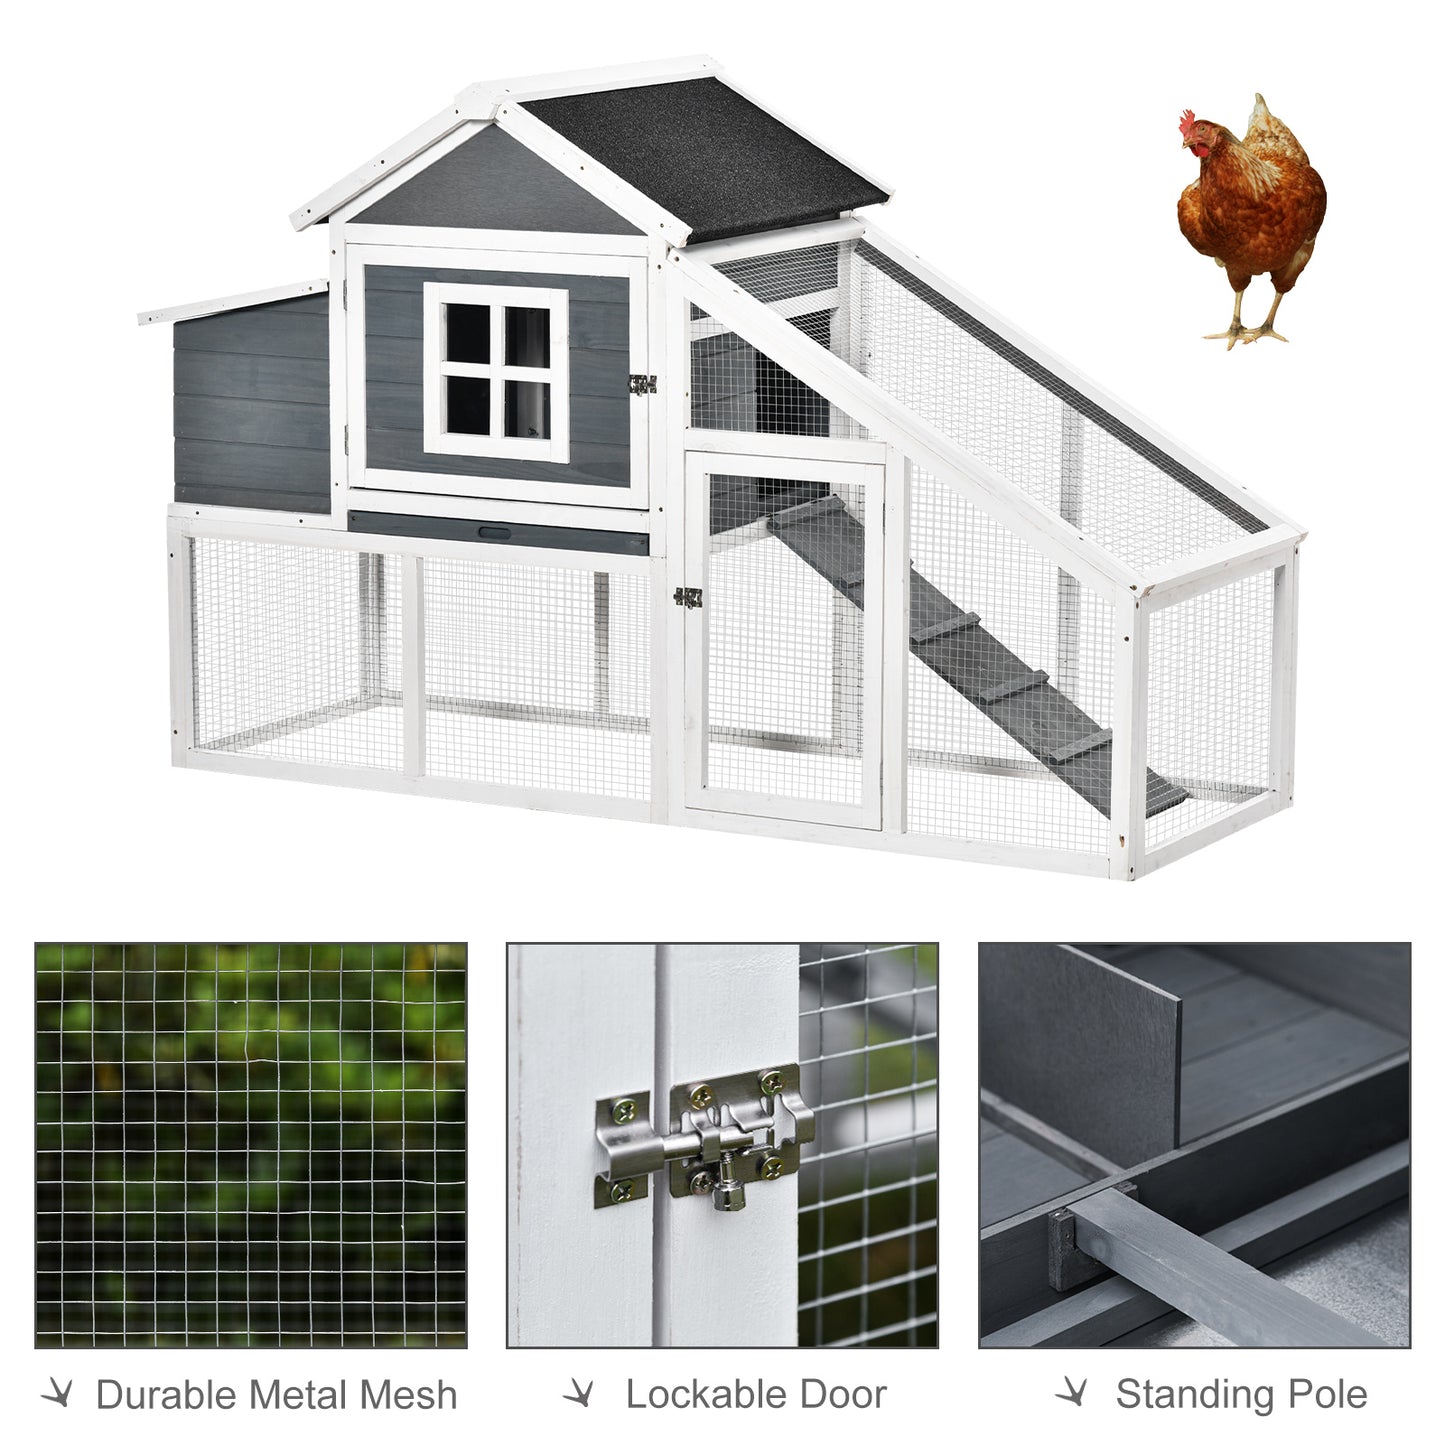 PawHut Chicken Coop, Hen House, Wooden Poultry Habitat with Outdoor Run, Nesting Box, Slide Out Tray, Lockable Doors, Ramp, 176 x 66 x 110cm, White